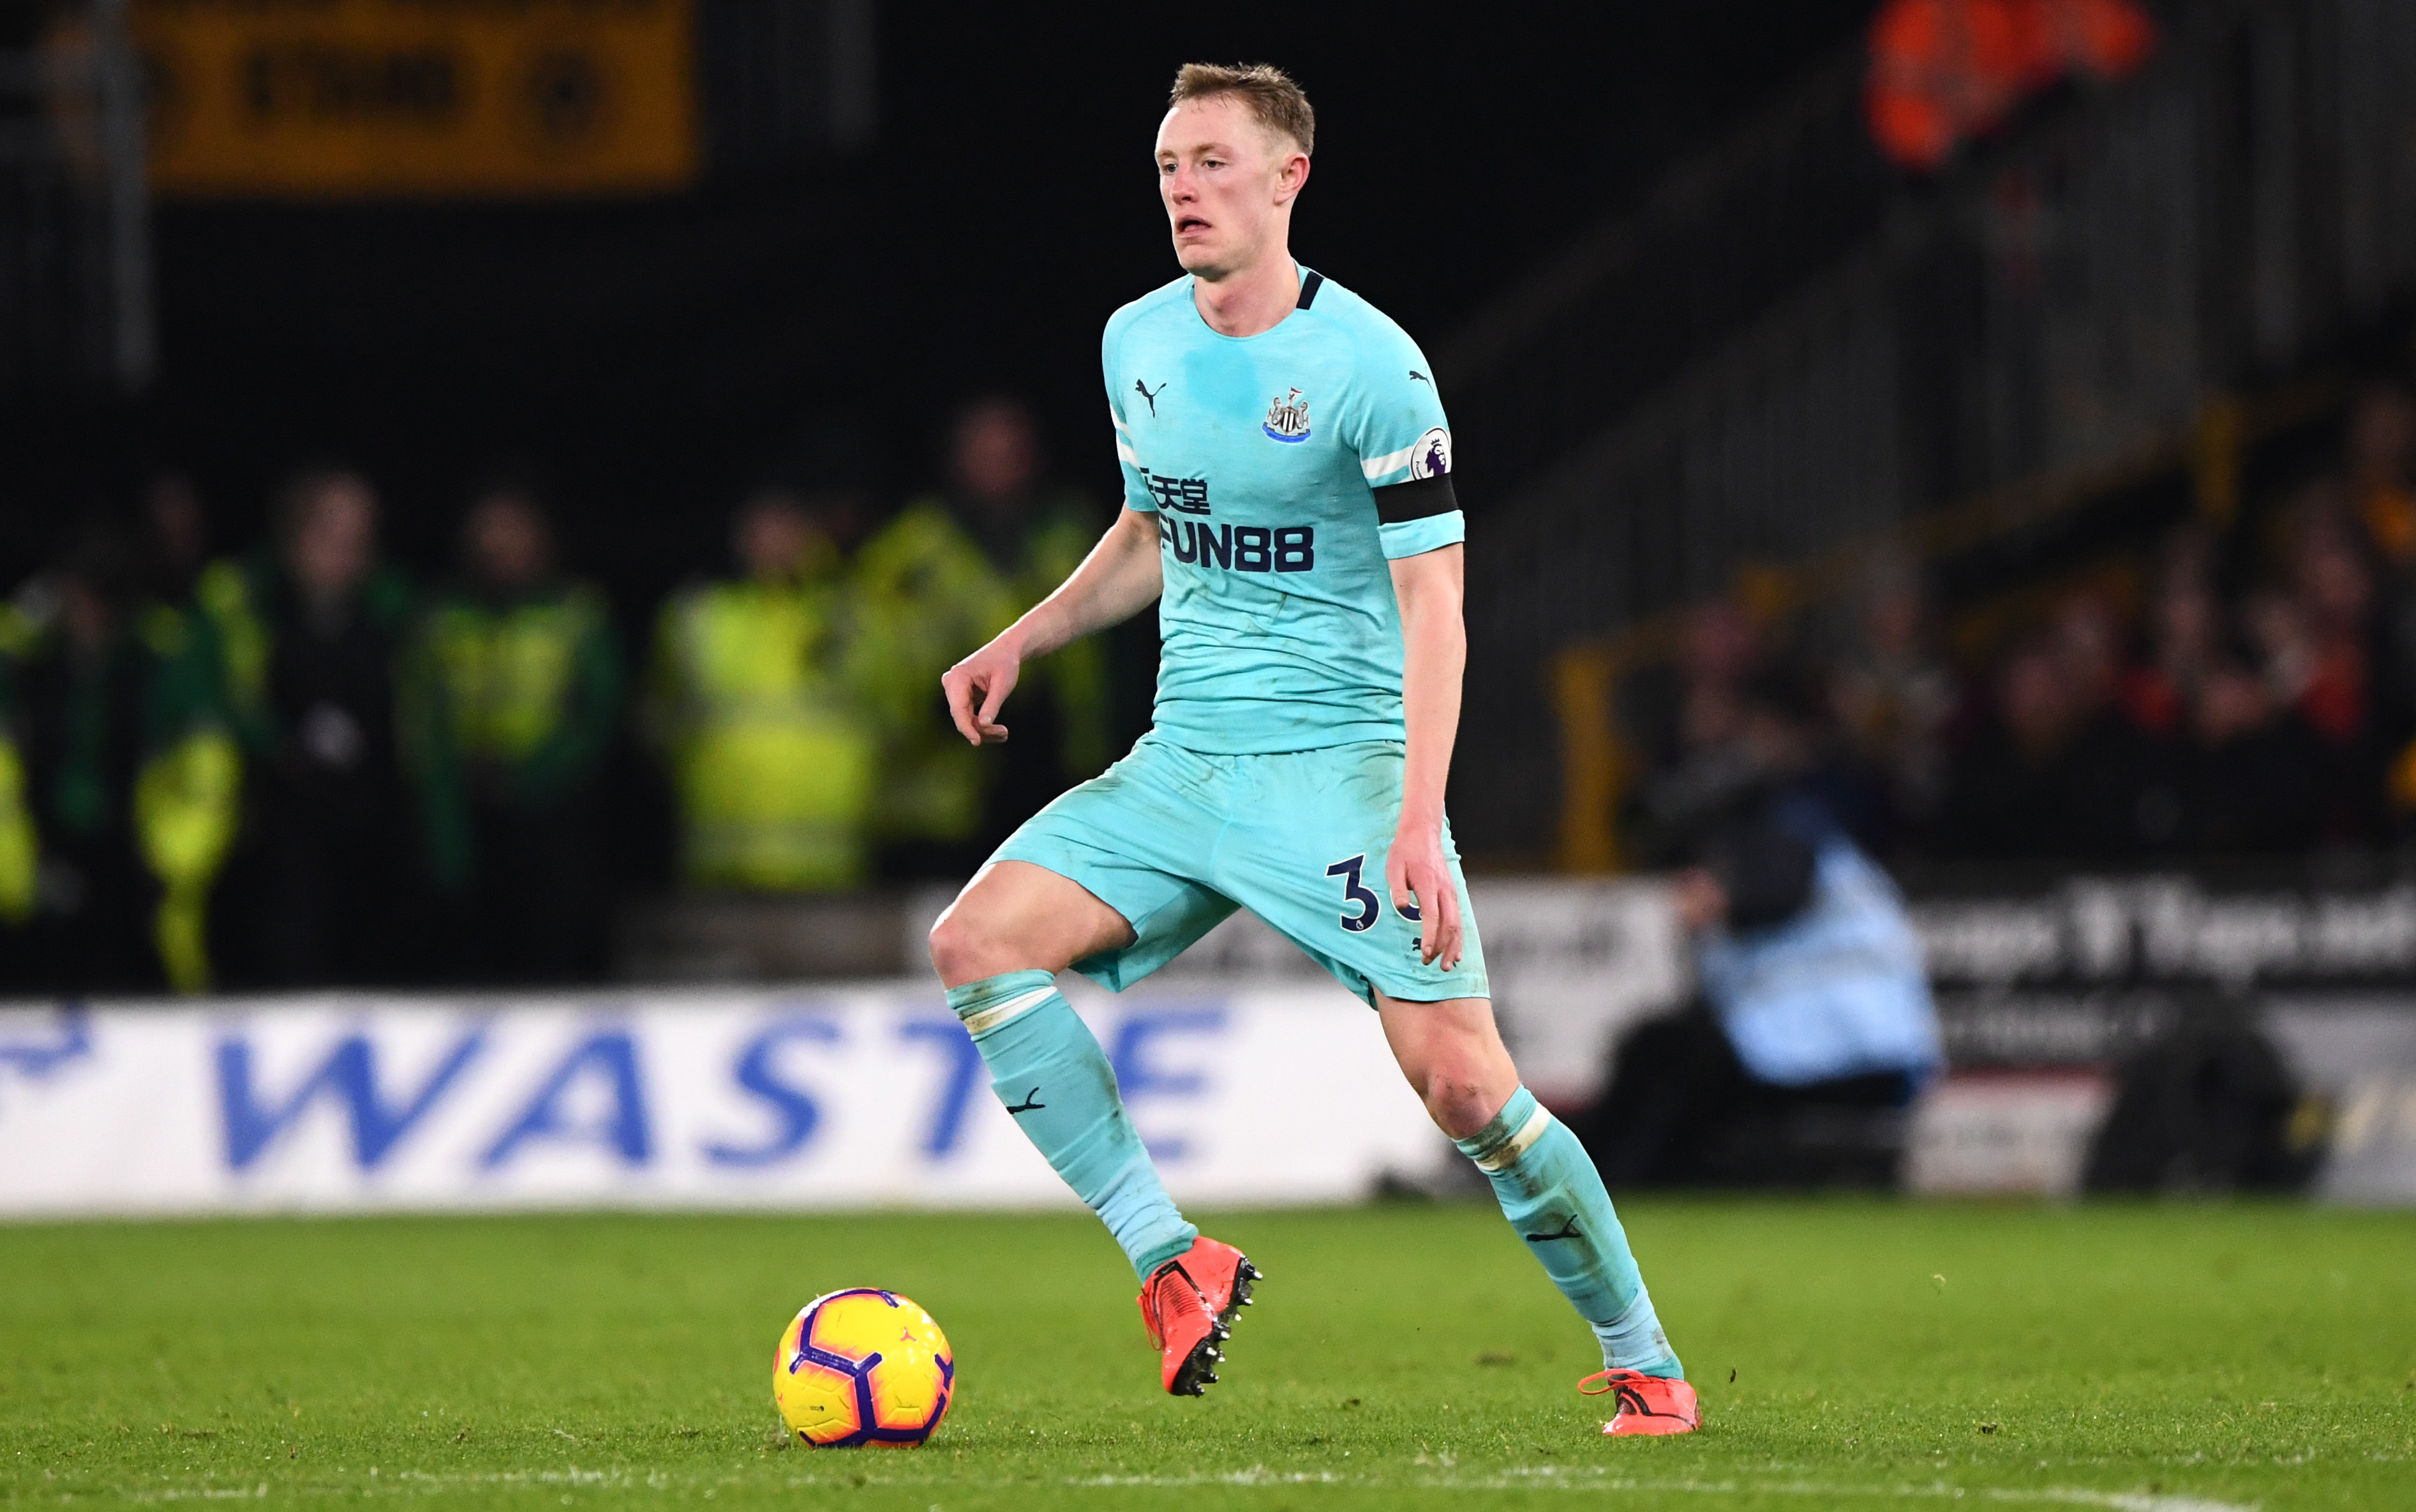 WOLVERHAMPTON, ENGLAND - FEBRUARY 11: Newcastle player Sean Longstaff in action during the Premier League match between Wolverhampton Wanderers and Newcastle United at Molineux on February 11, 2019 in Wolverhampton, United Kingdom. (Photo by Stu Forster/Getty Images)